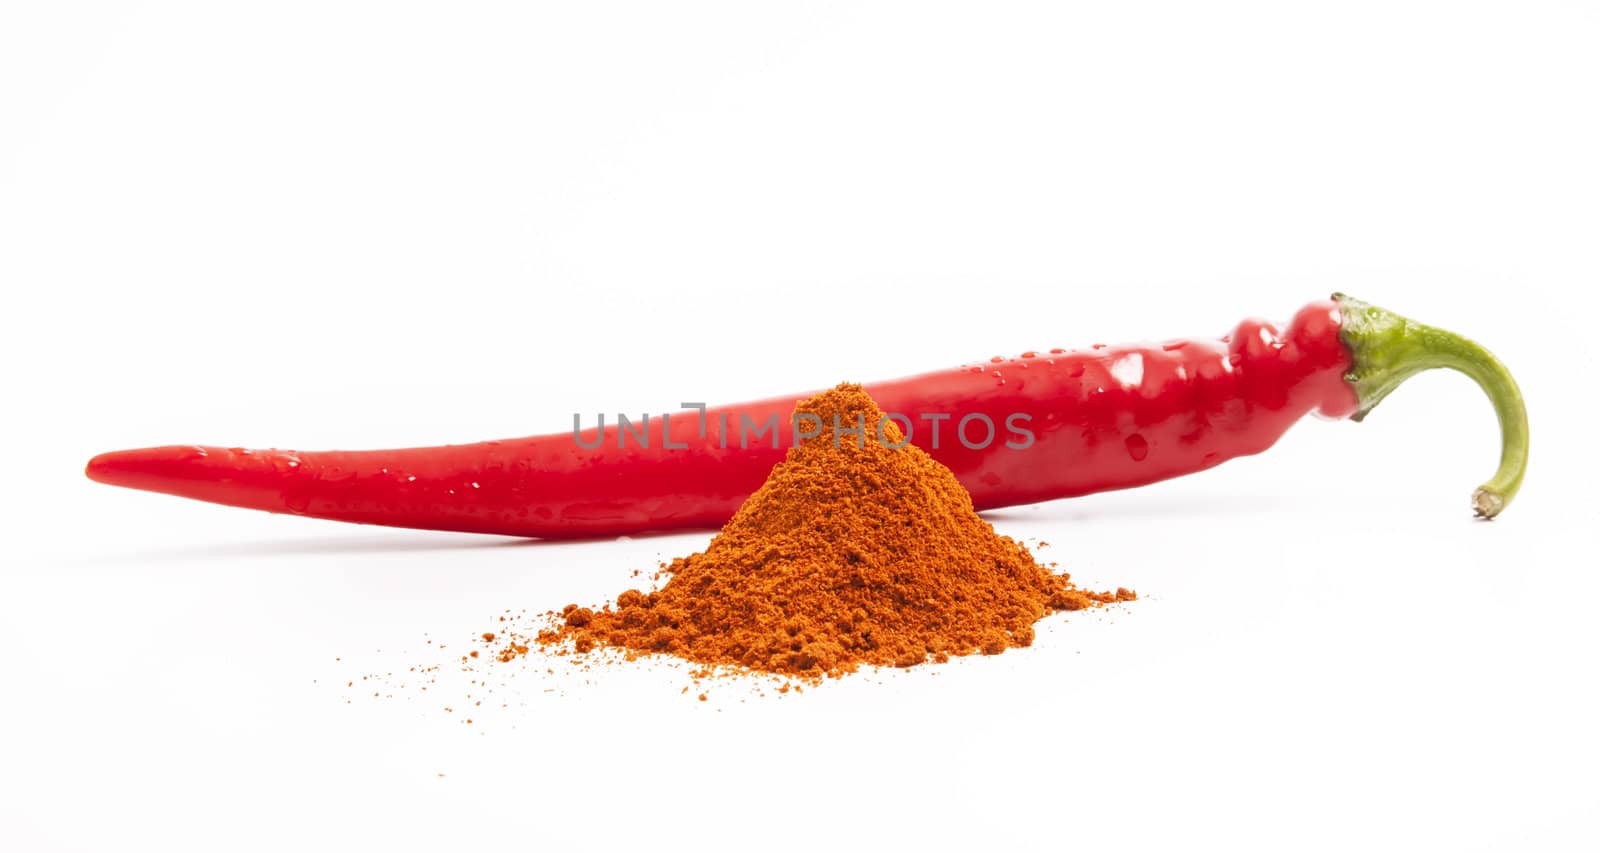 Red chili pepper and pile of paprika spice by RawGroup